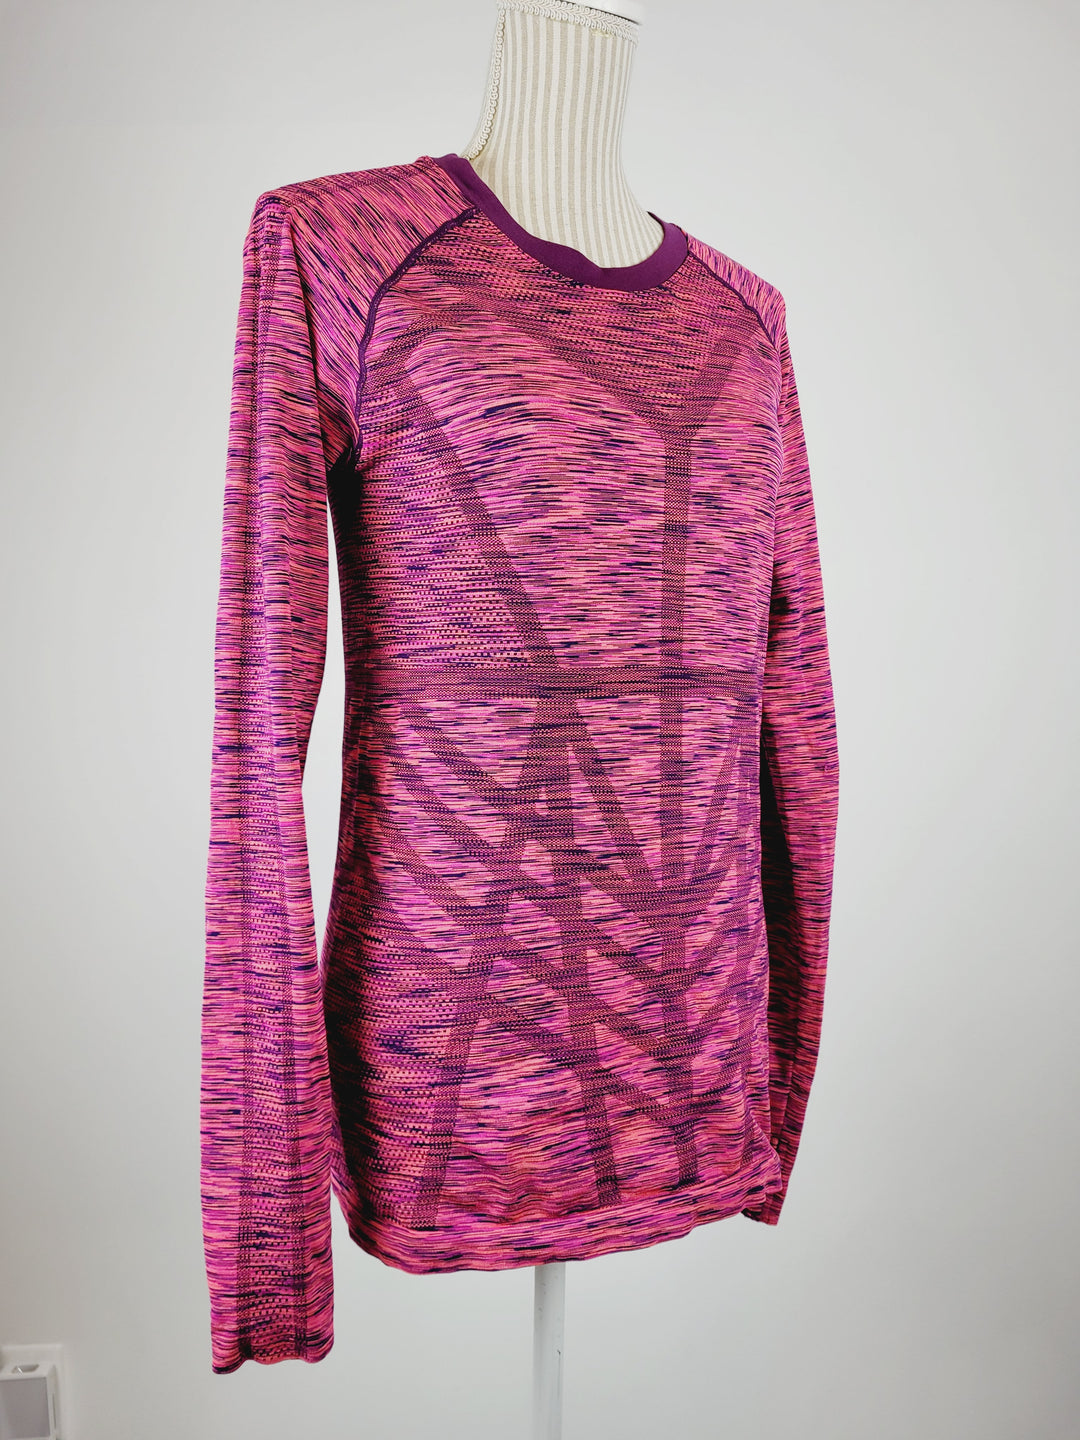 MUSE CLIMATEWEAR STRETCH TOP LADIES LARGE EUC